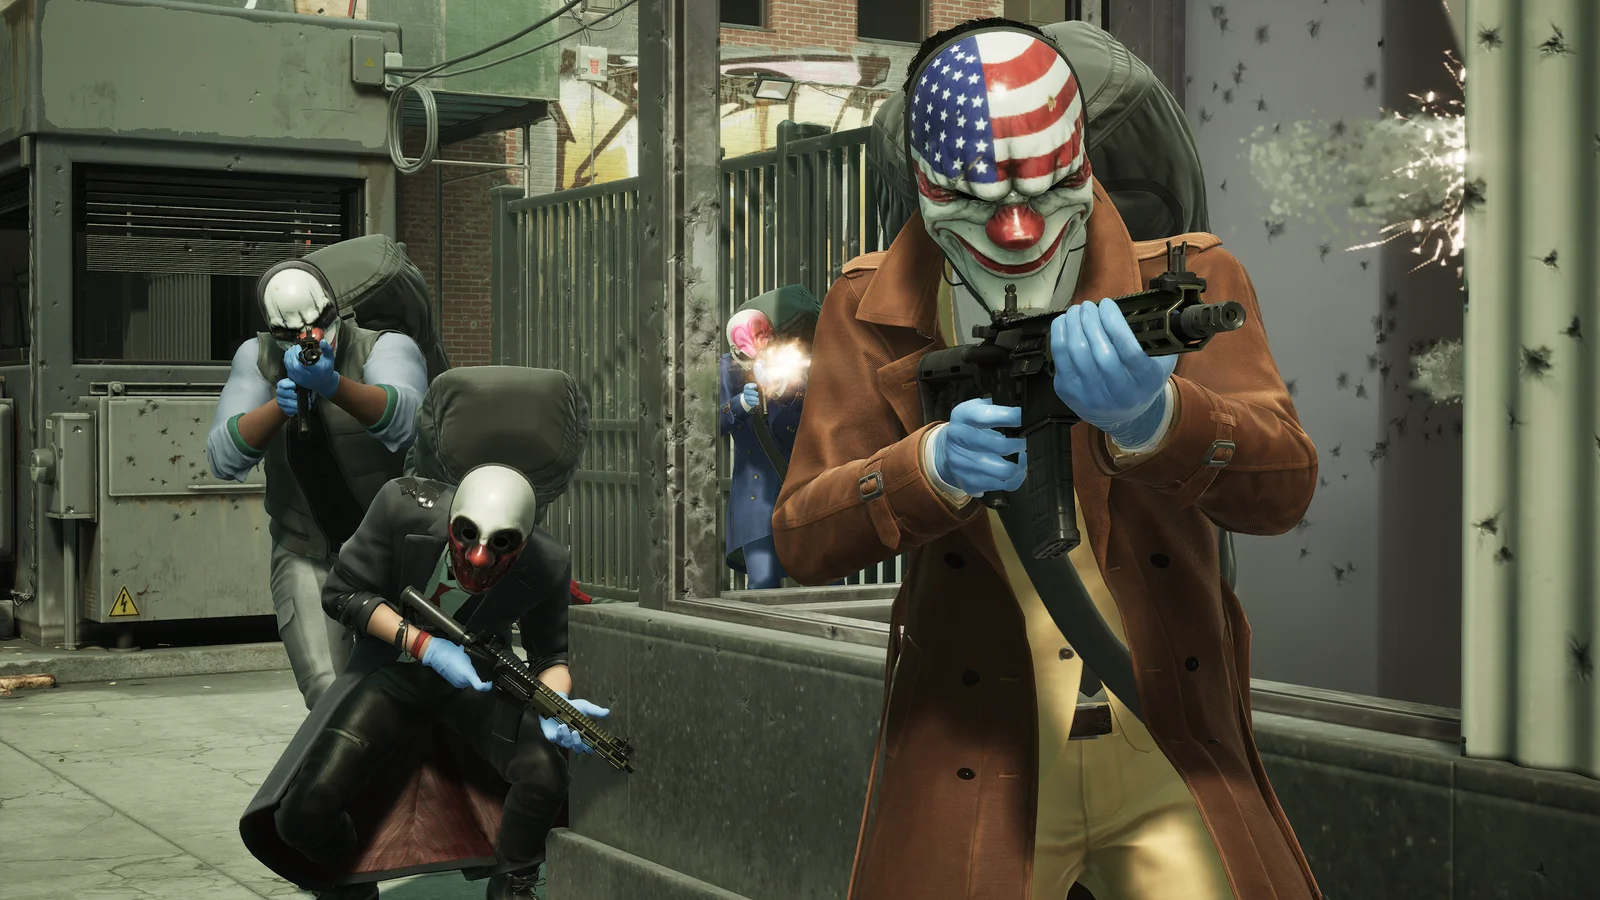 The developers of Payday 3 showed a short film with a bank robbery